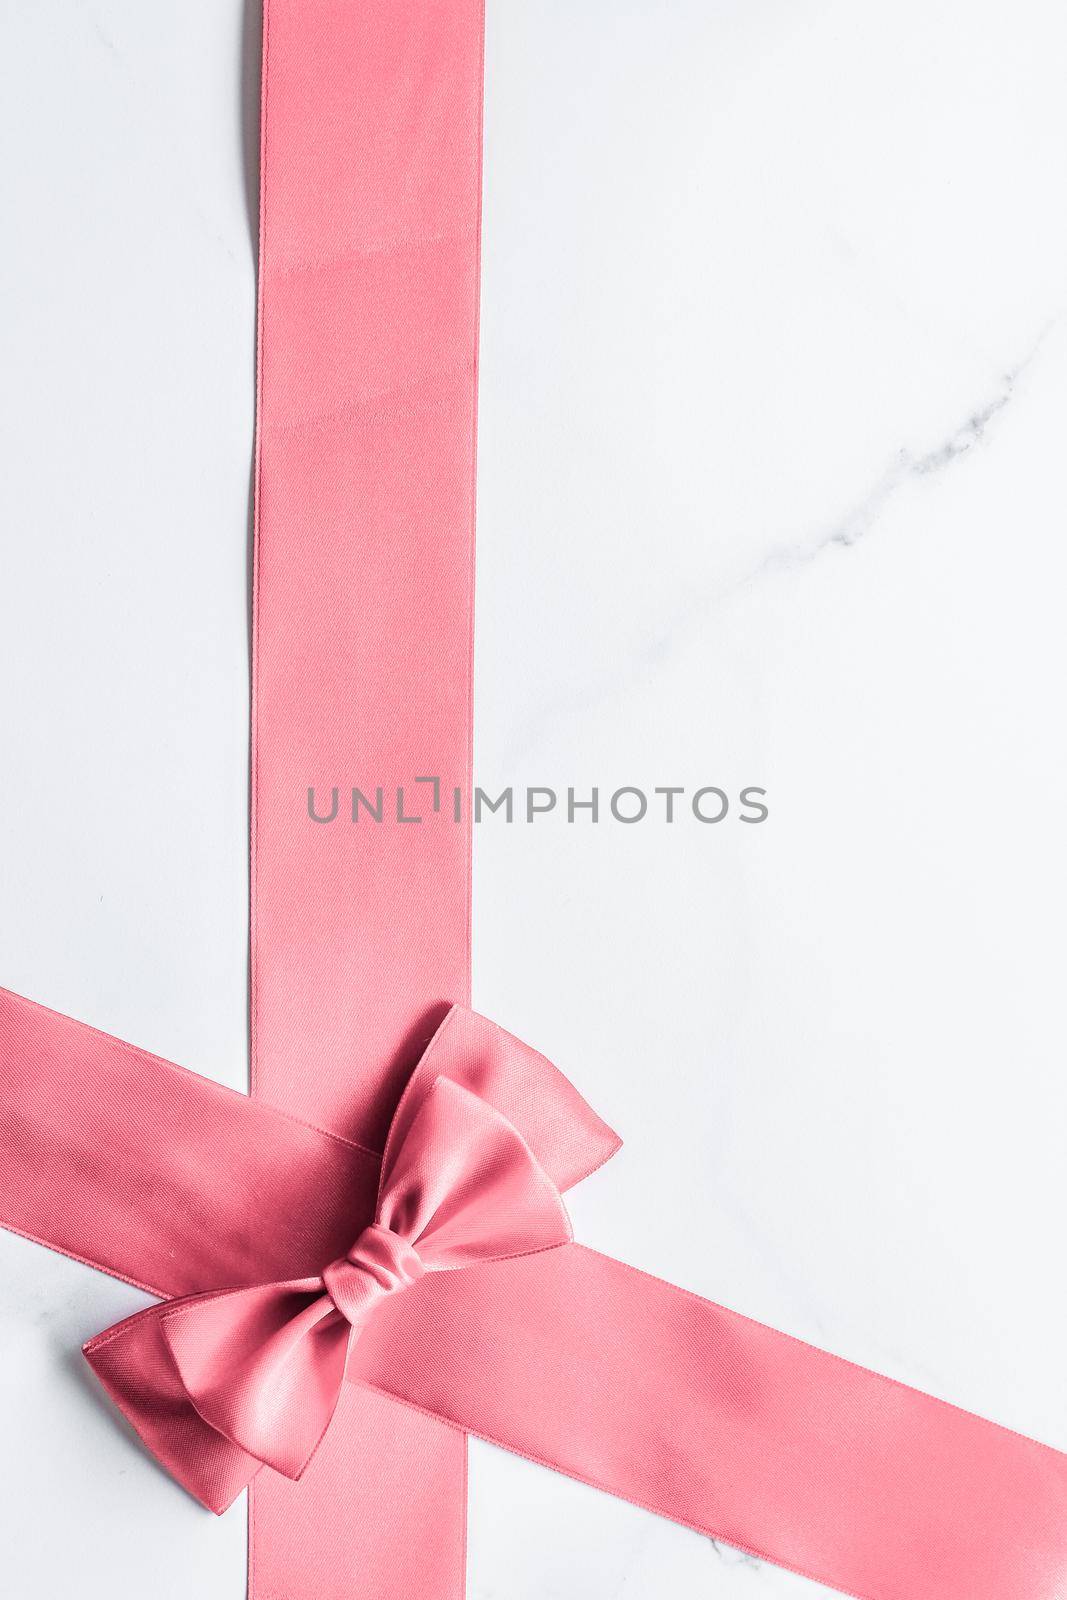 Birthday, wedding and girly branding concept - Coral silk ribbon and bow on marble background, girl baby shower present and glamour fashion gift decor for luxury beauty brand, holiday flatlay design